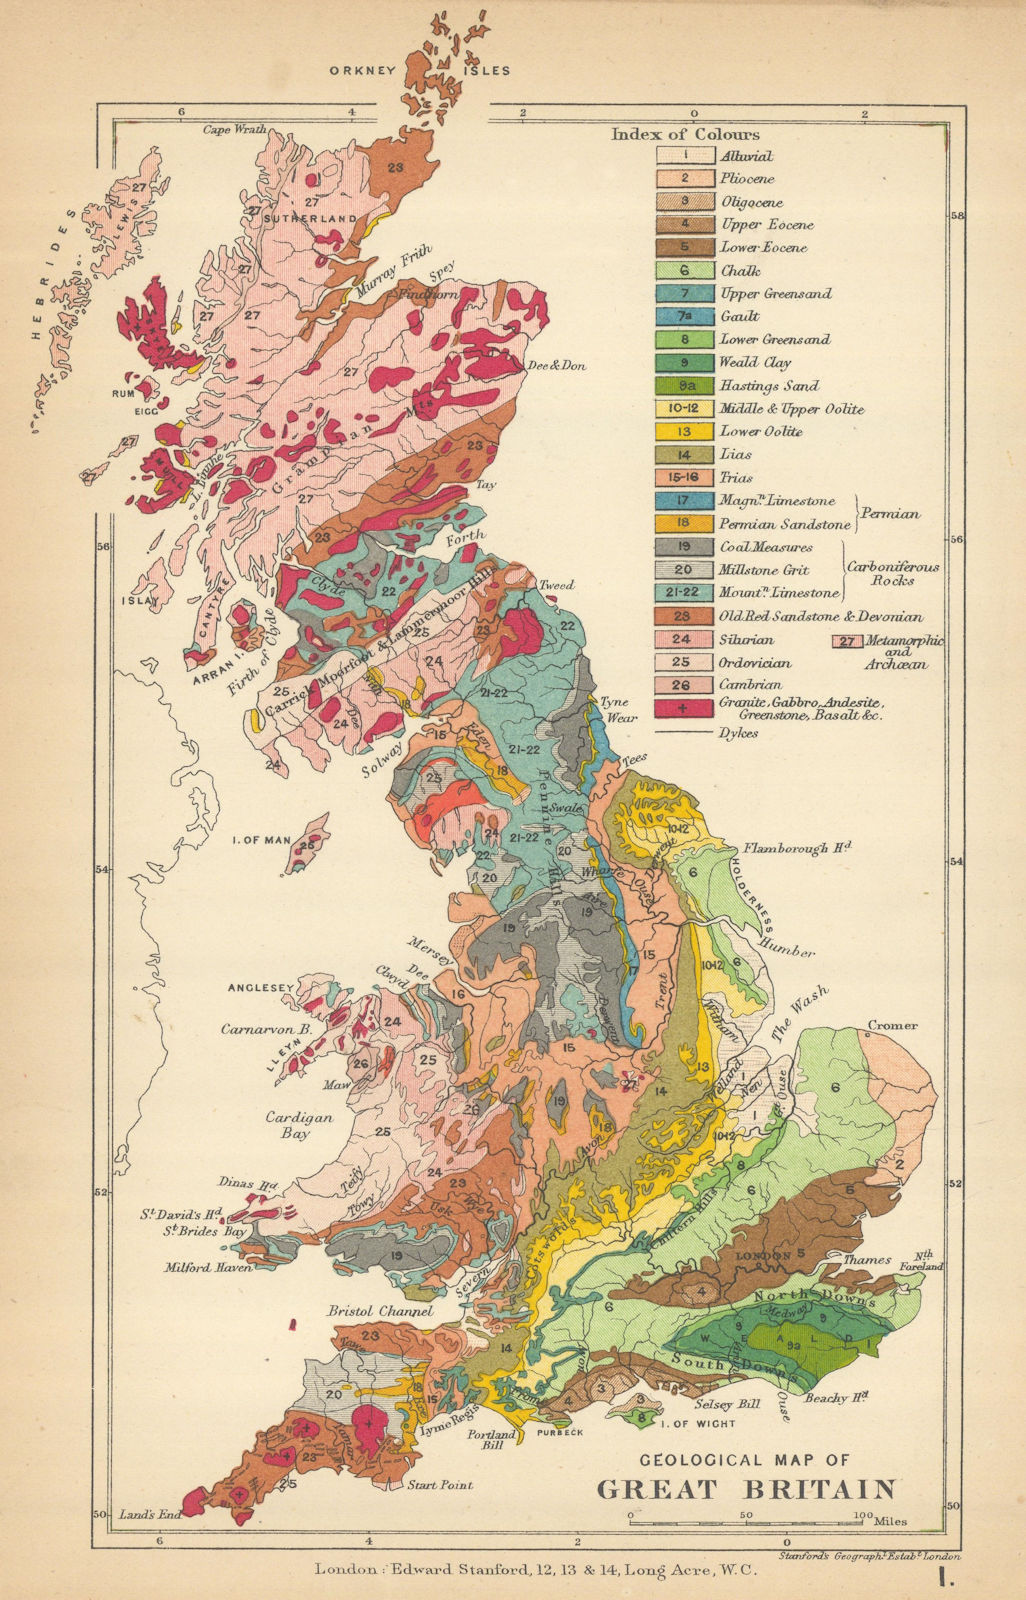 Associate Product UK Geological map of Great Britain 1904 old antique vintage plan chart